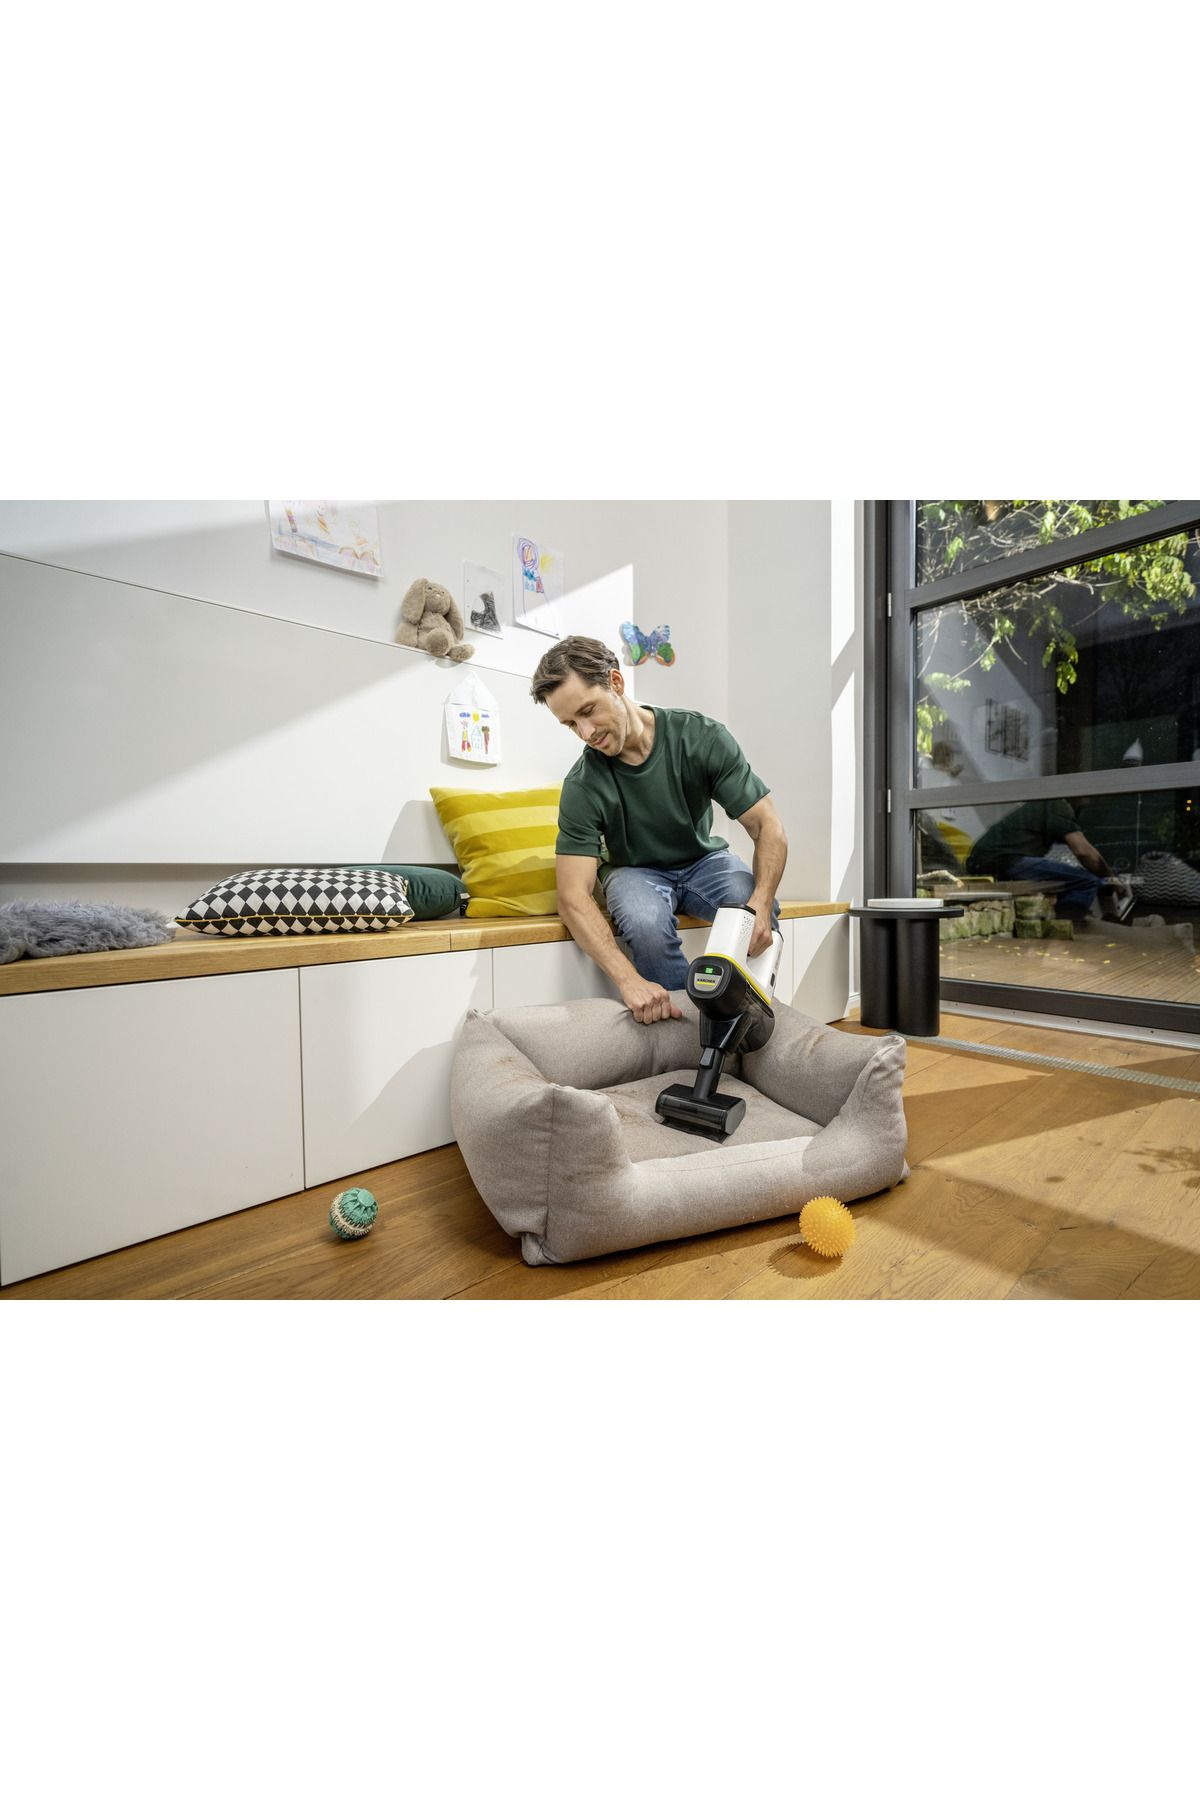 Vc 6 cordless ourfamily pet. Керхер VC 6 Cordless. Пылесос Karcher VC 6 Cordless ourfamily Pet. Пылесос VC 6 Cordless our Family.